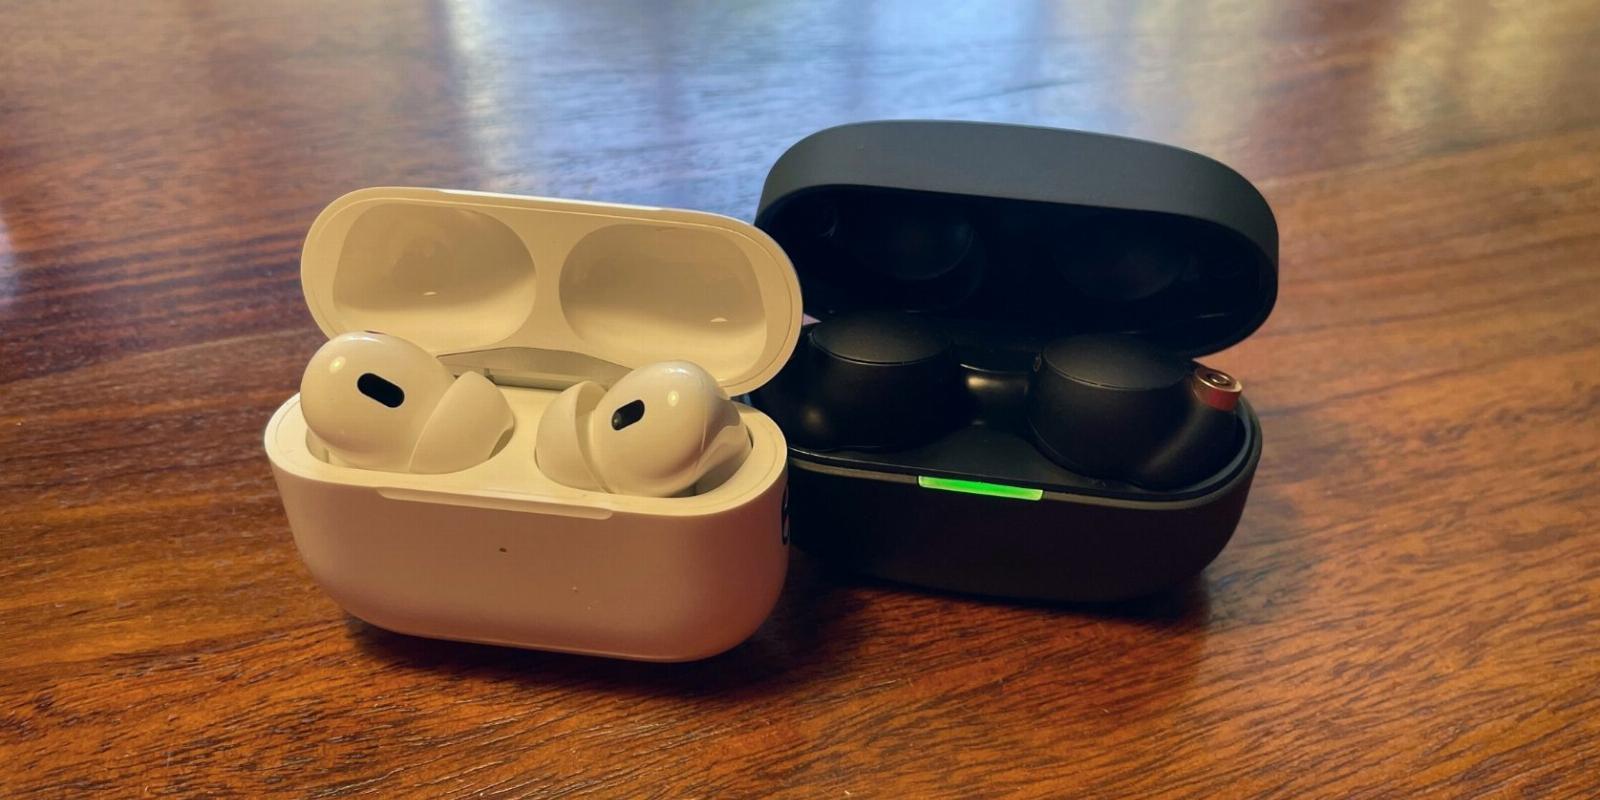 Apple AirPods Pro 2 vs. Sony WF-1000XM4: Which One Should You Buy?